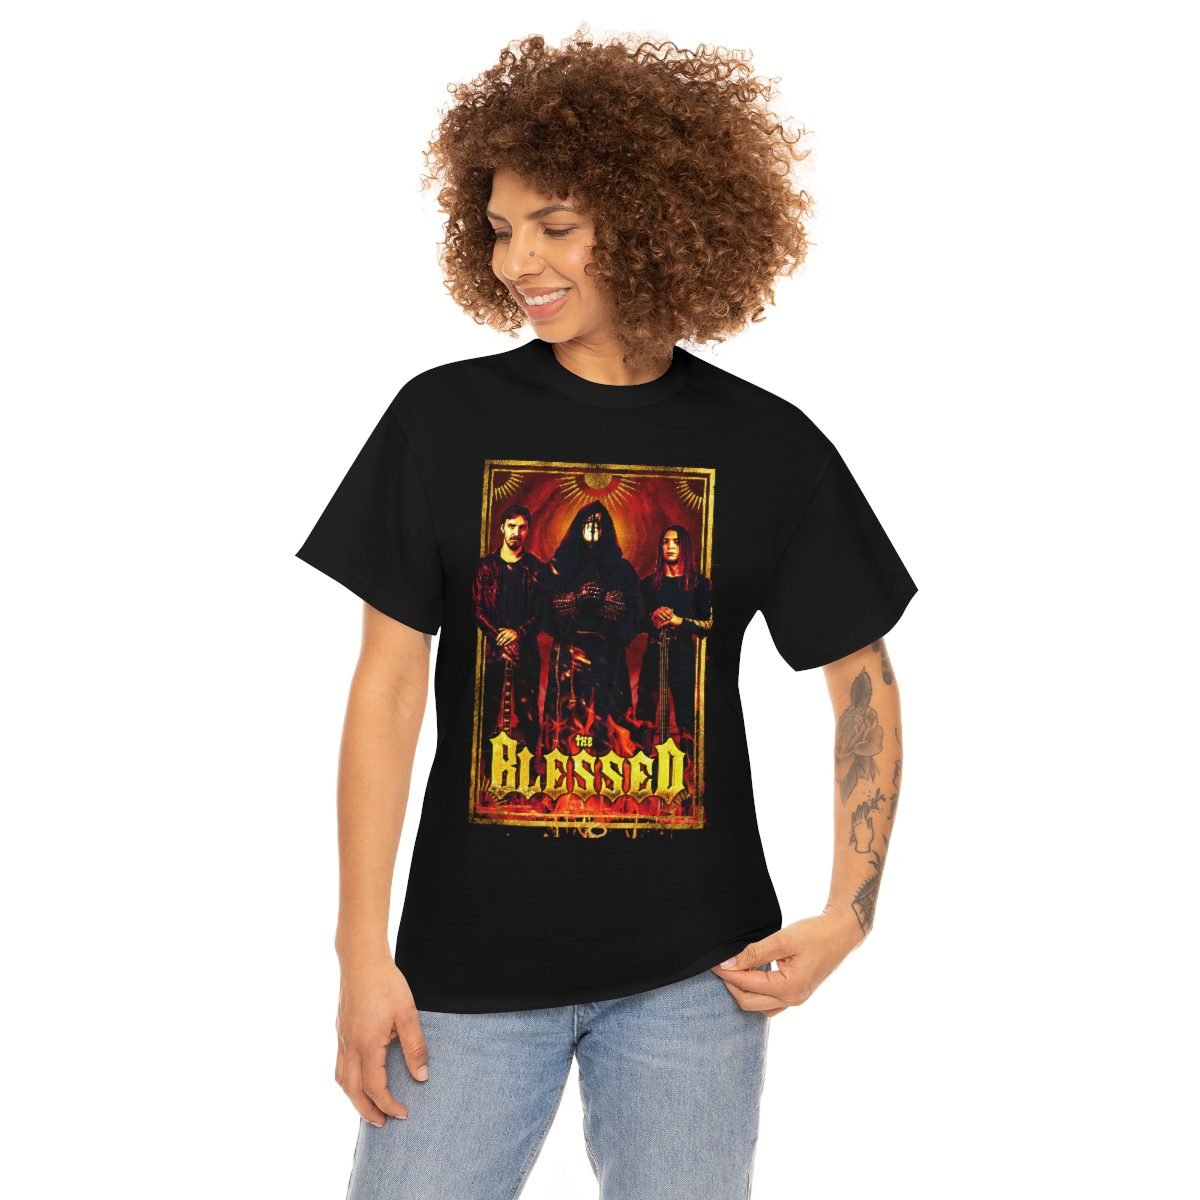 The Blessed Band Photo Short Sleeve Tshirt